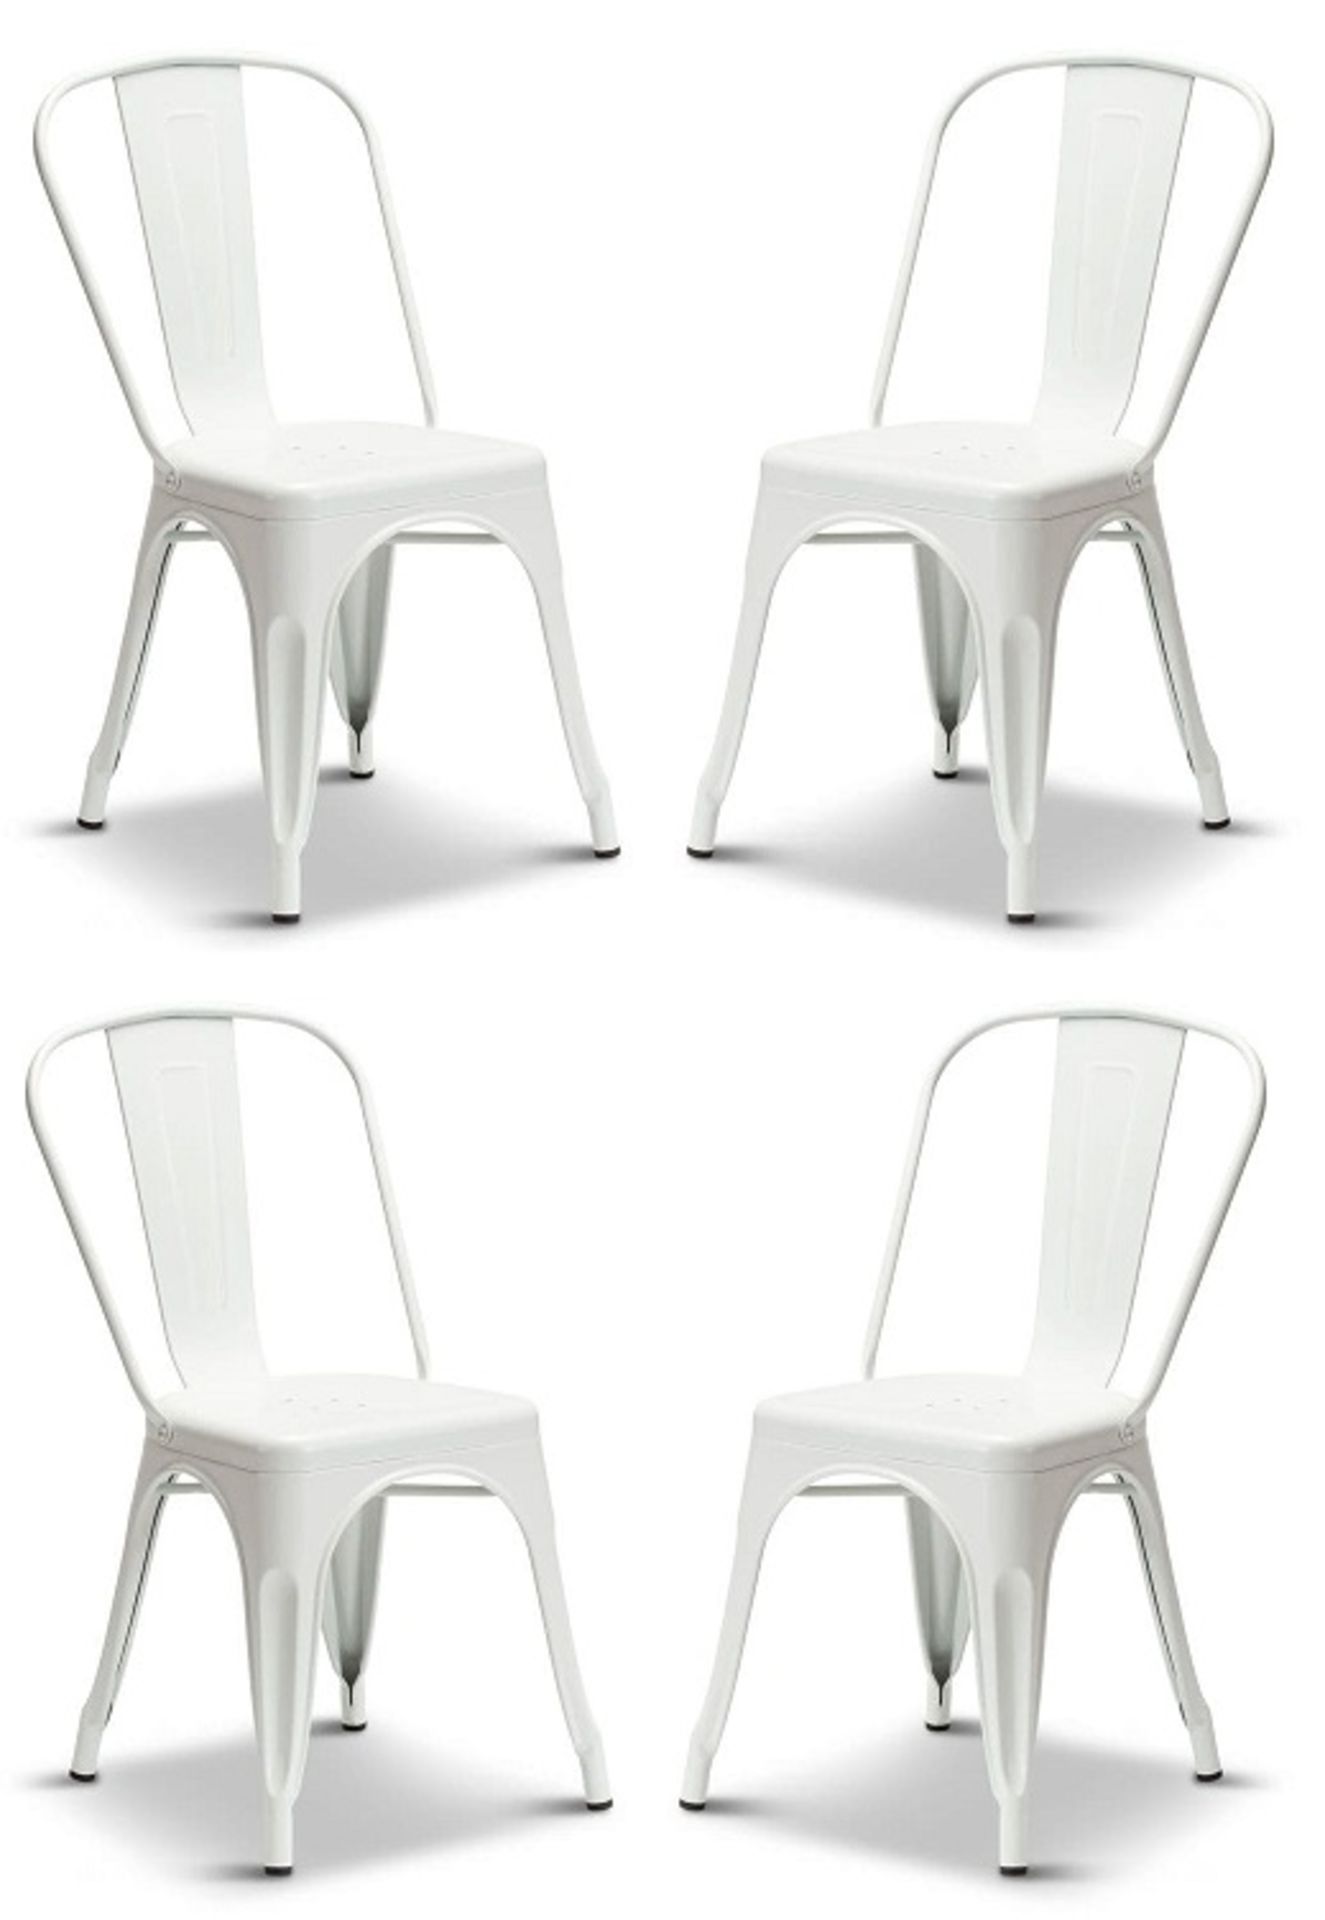 1 x Tolix Industrial Style Outdoor Bistro Table and Chair Set in White- Includes 1 x Table and 4 x - Image 7 of 14